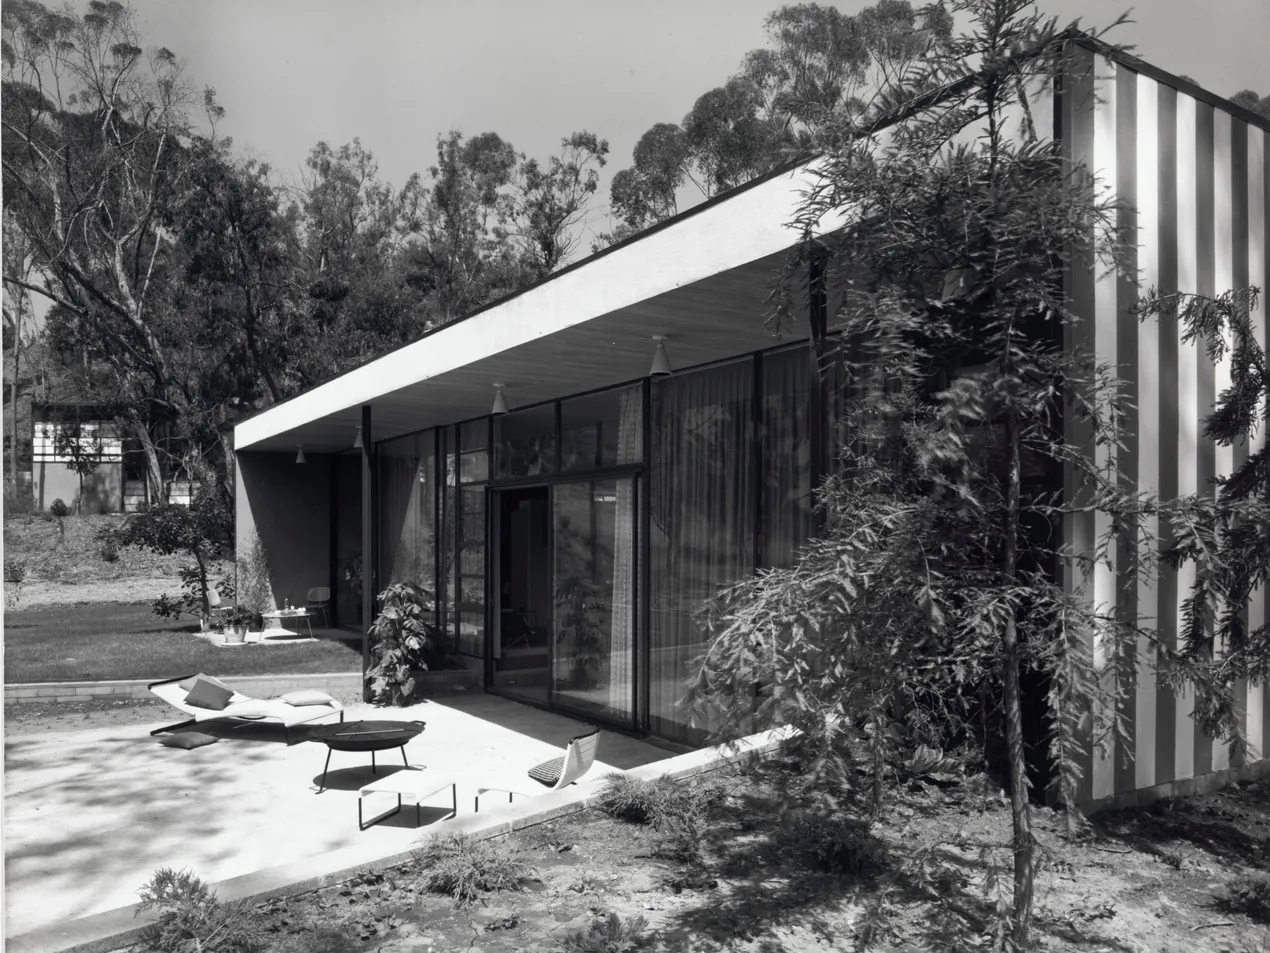 The Entenza House exterior. The roof is flat and the exterior has floor to ceiling windows. There are trees surrounding the house. There is an outdoor seating area.